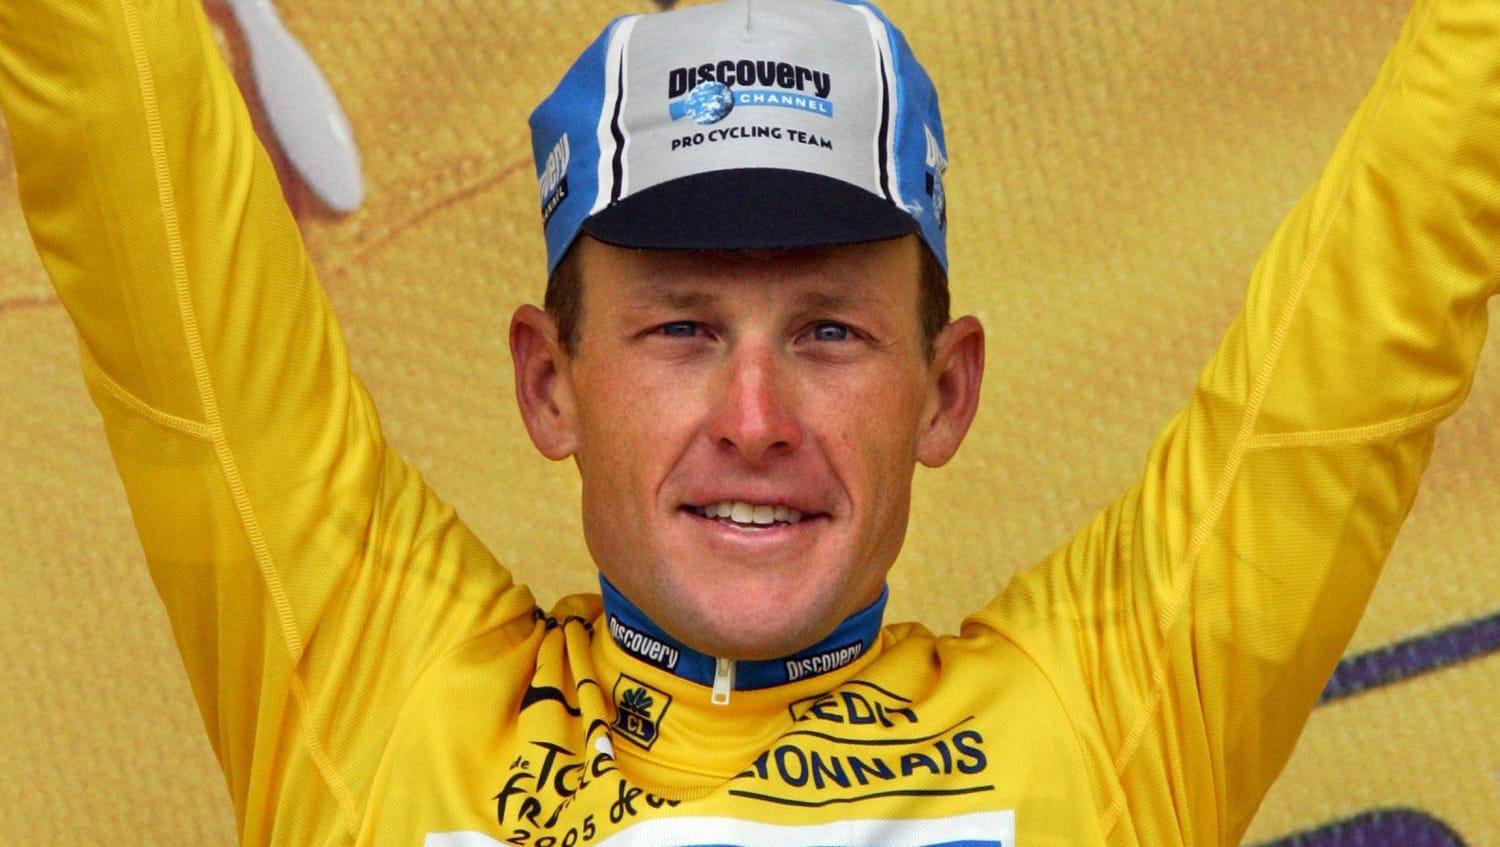 Indiana doctors discuss another side of Lance Armstrong: Cancer fighter